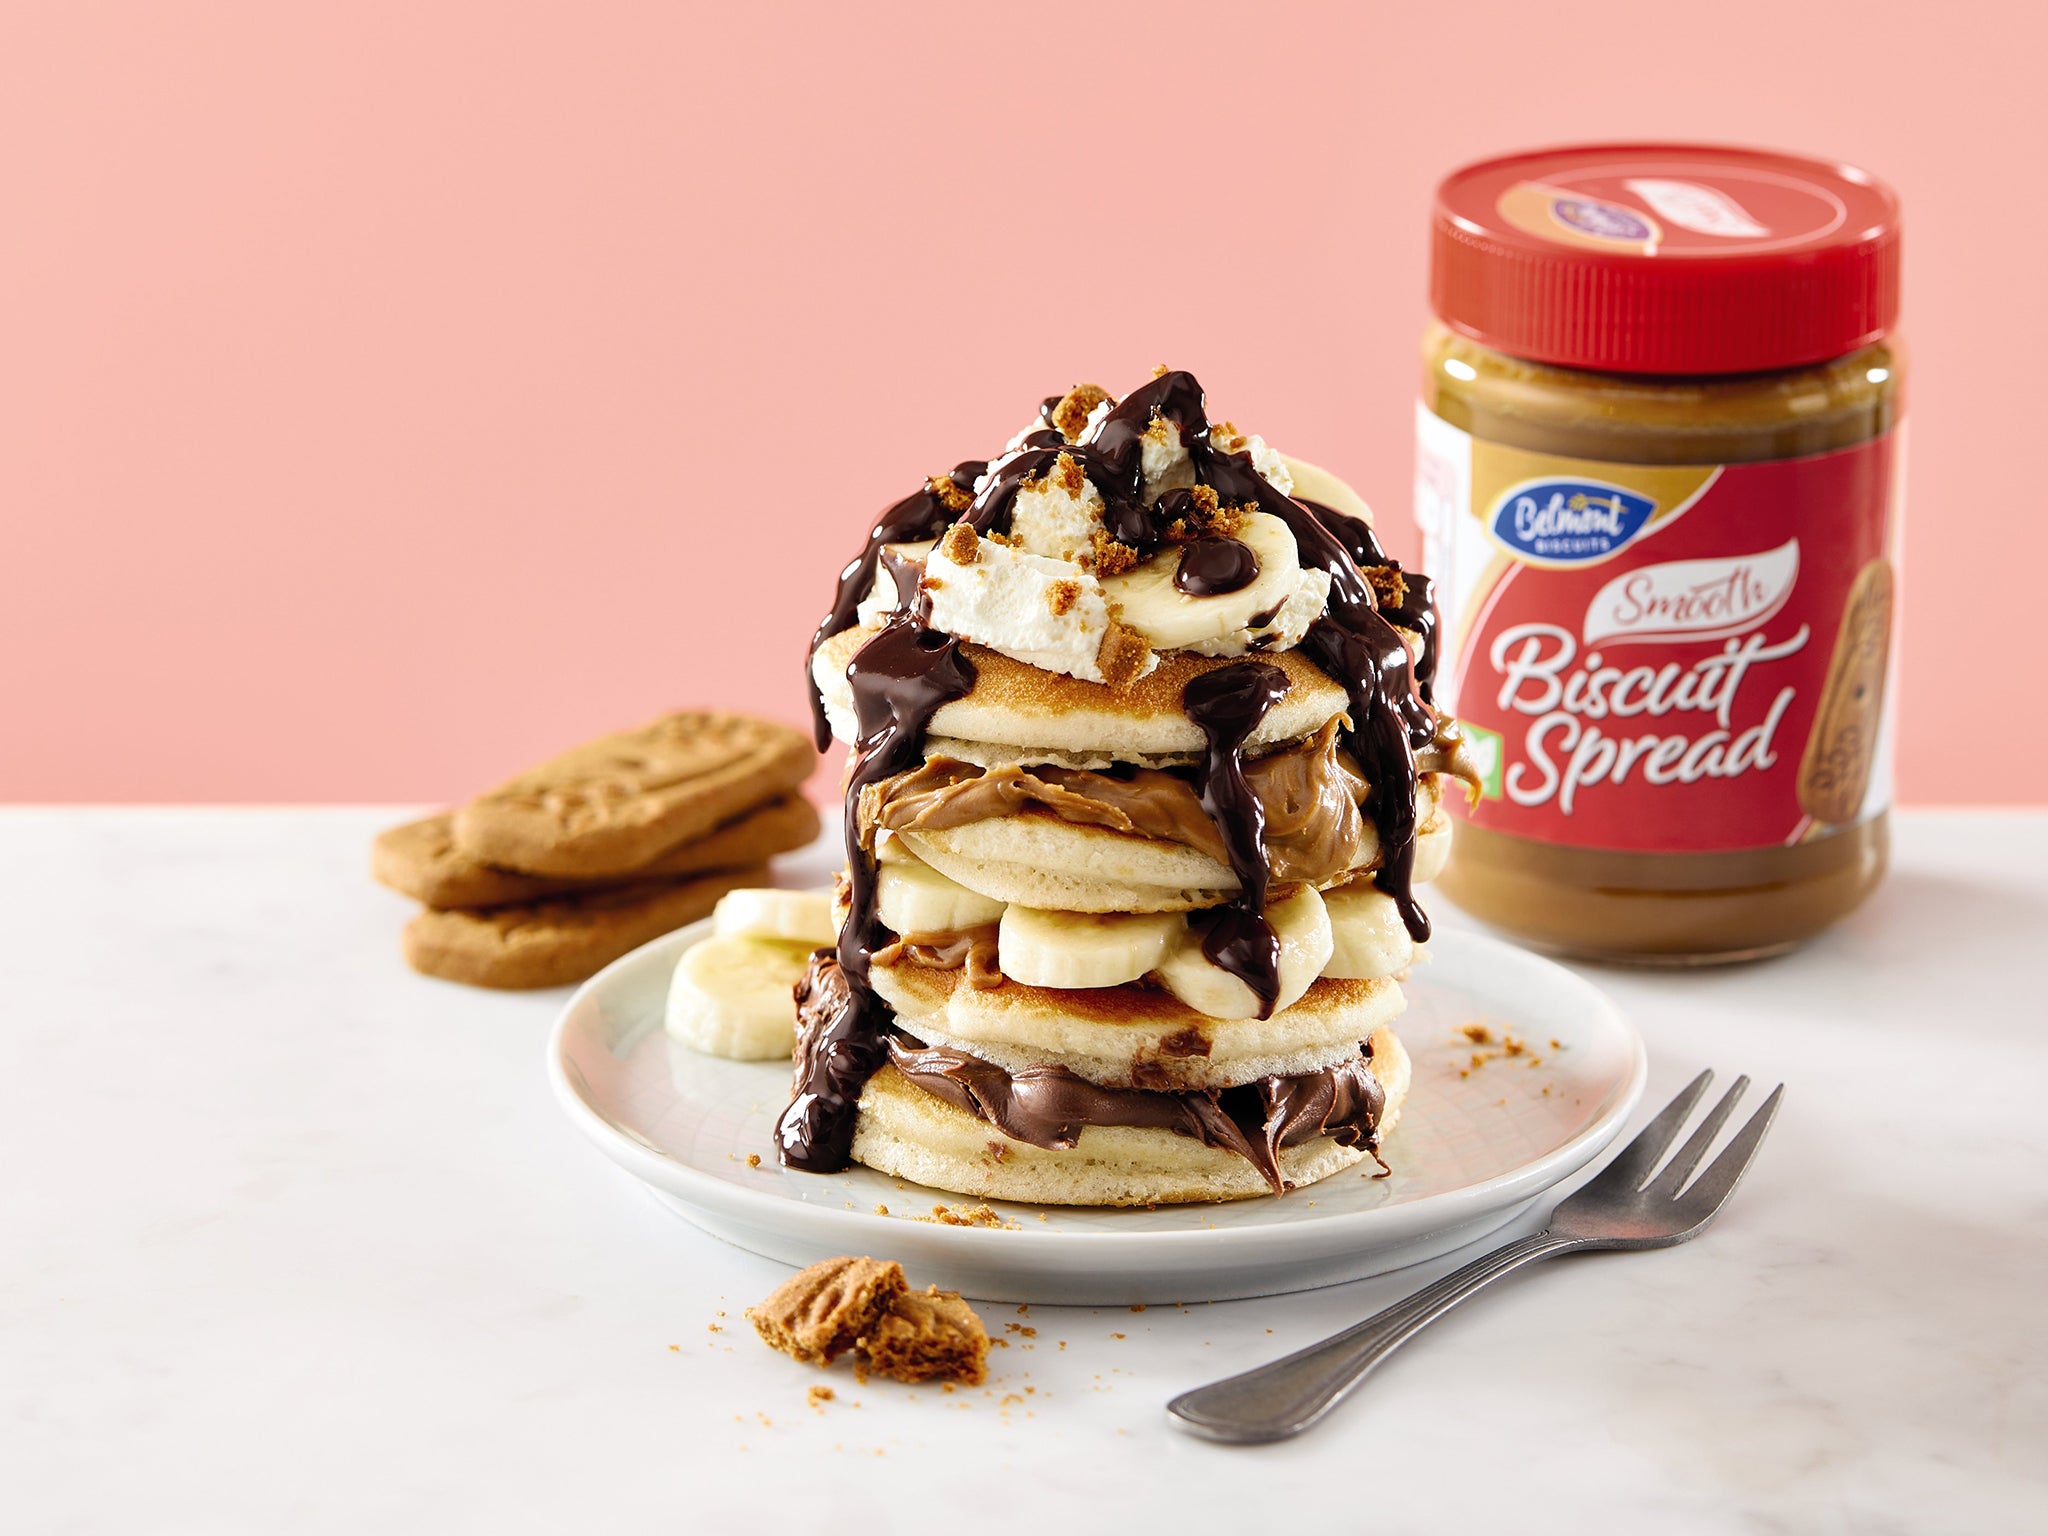 Ever thought of swirling Biscoff through your next batch of pancakes?